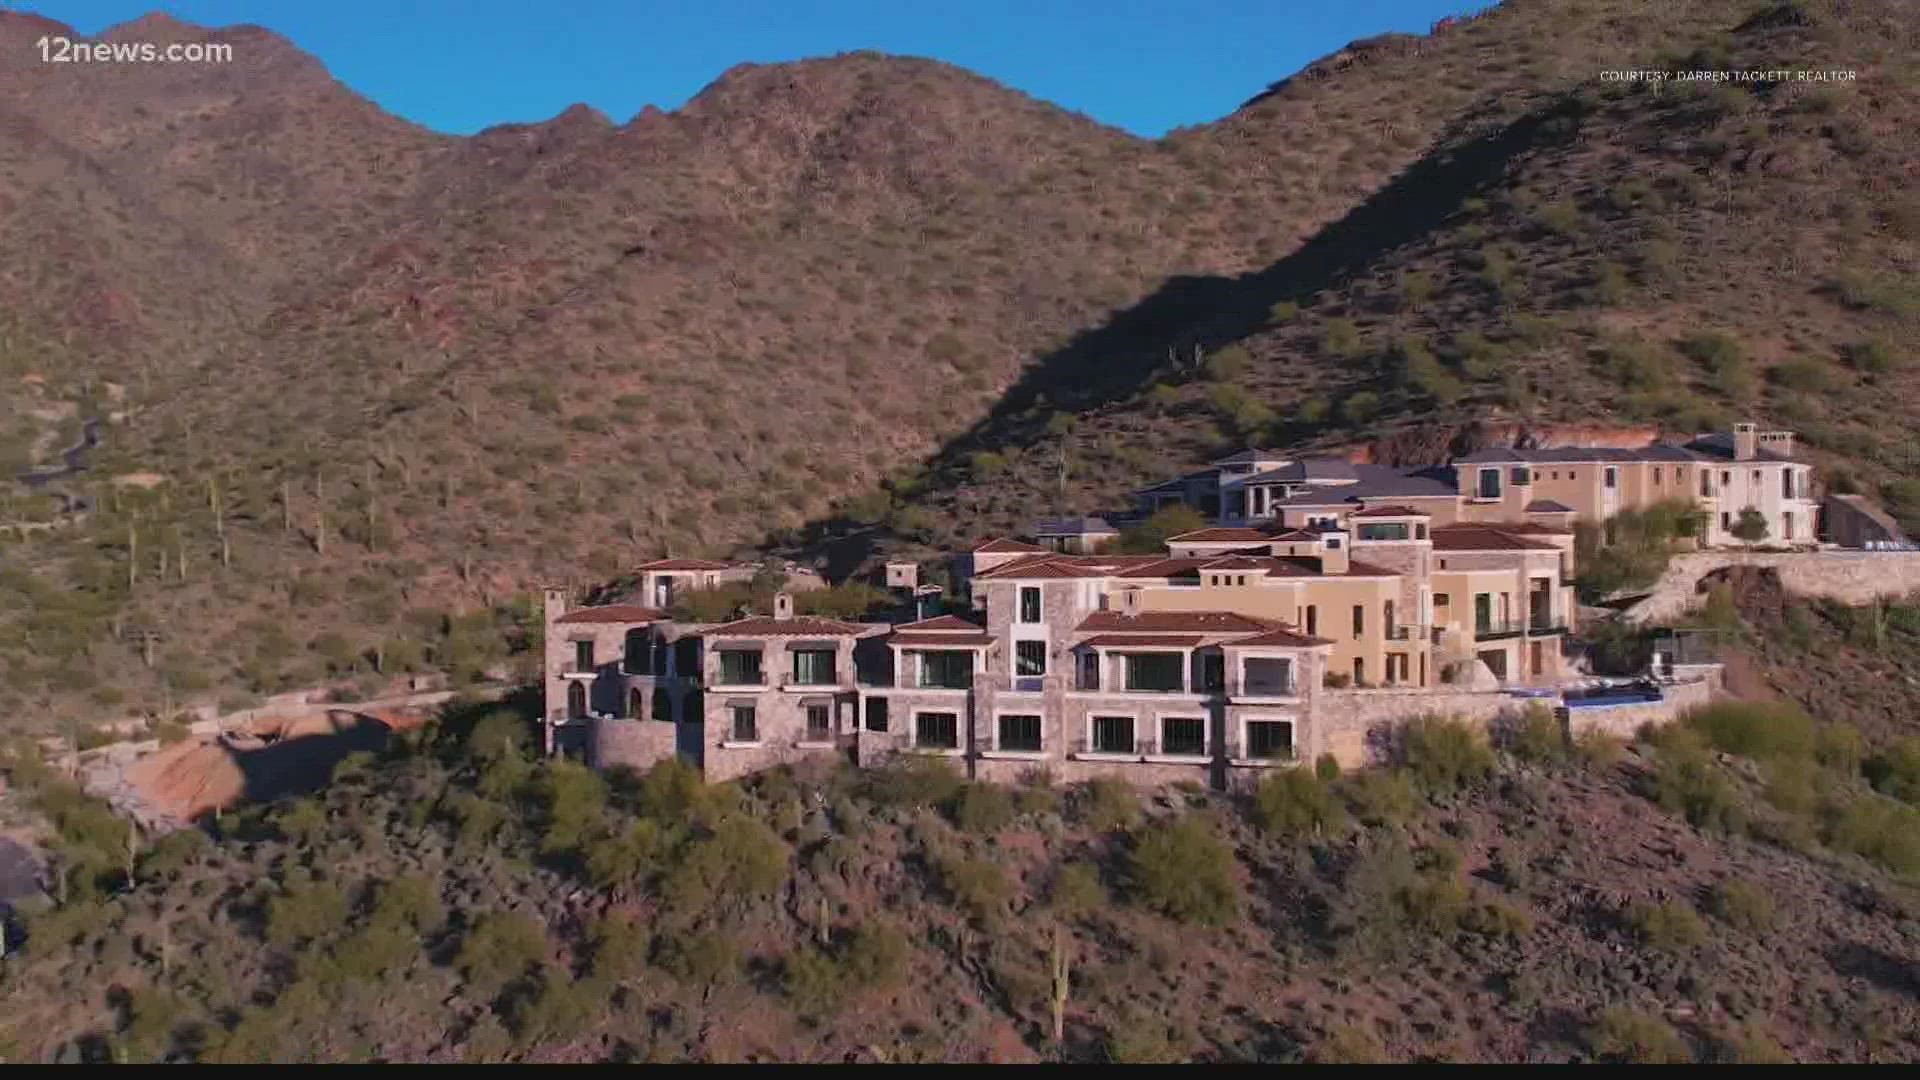 One home in Scottsdale could break Arizona's record for the most expensive home ever sold in the state. The asking price? $29.5 million!